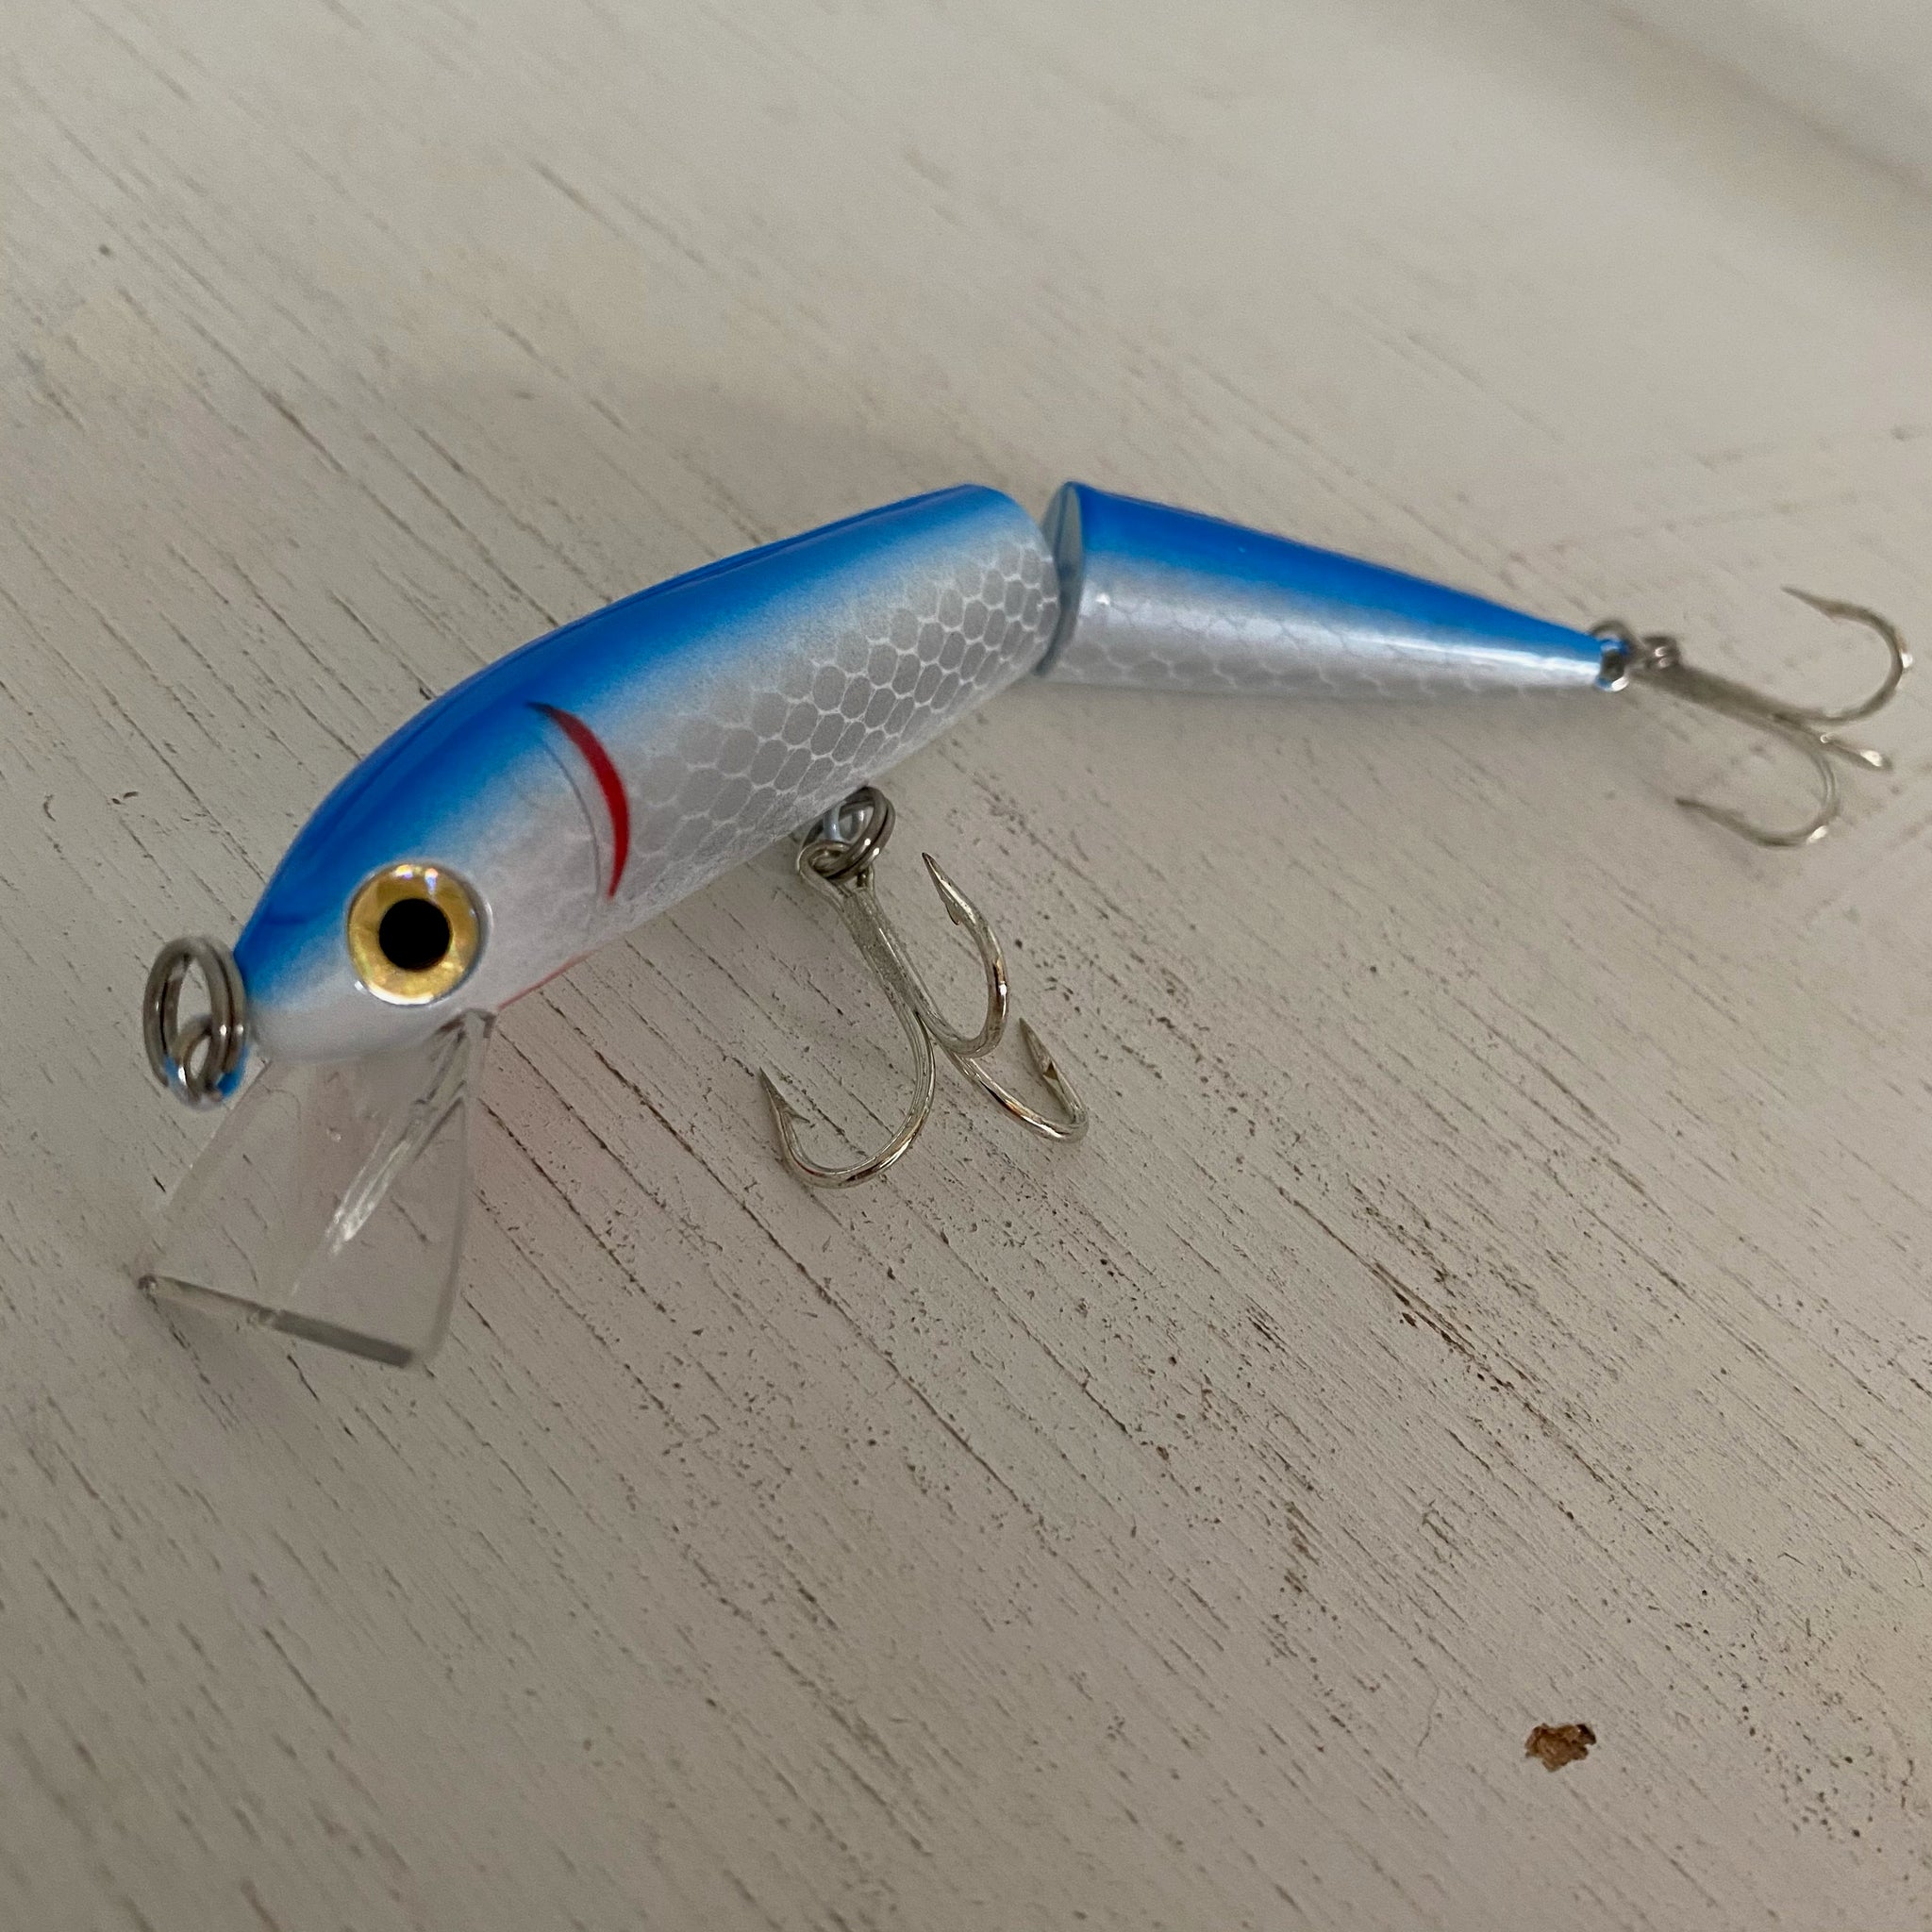 All Saltwater Fishing Baits, Lures Gotcha for sale